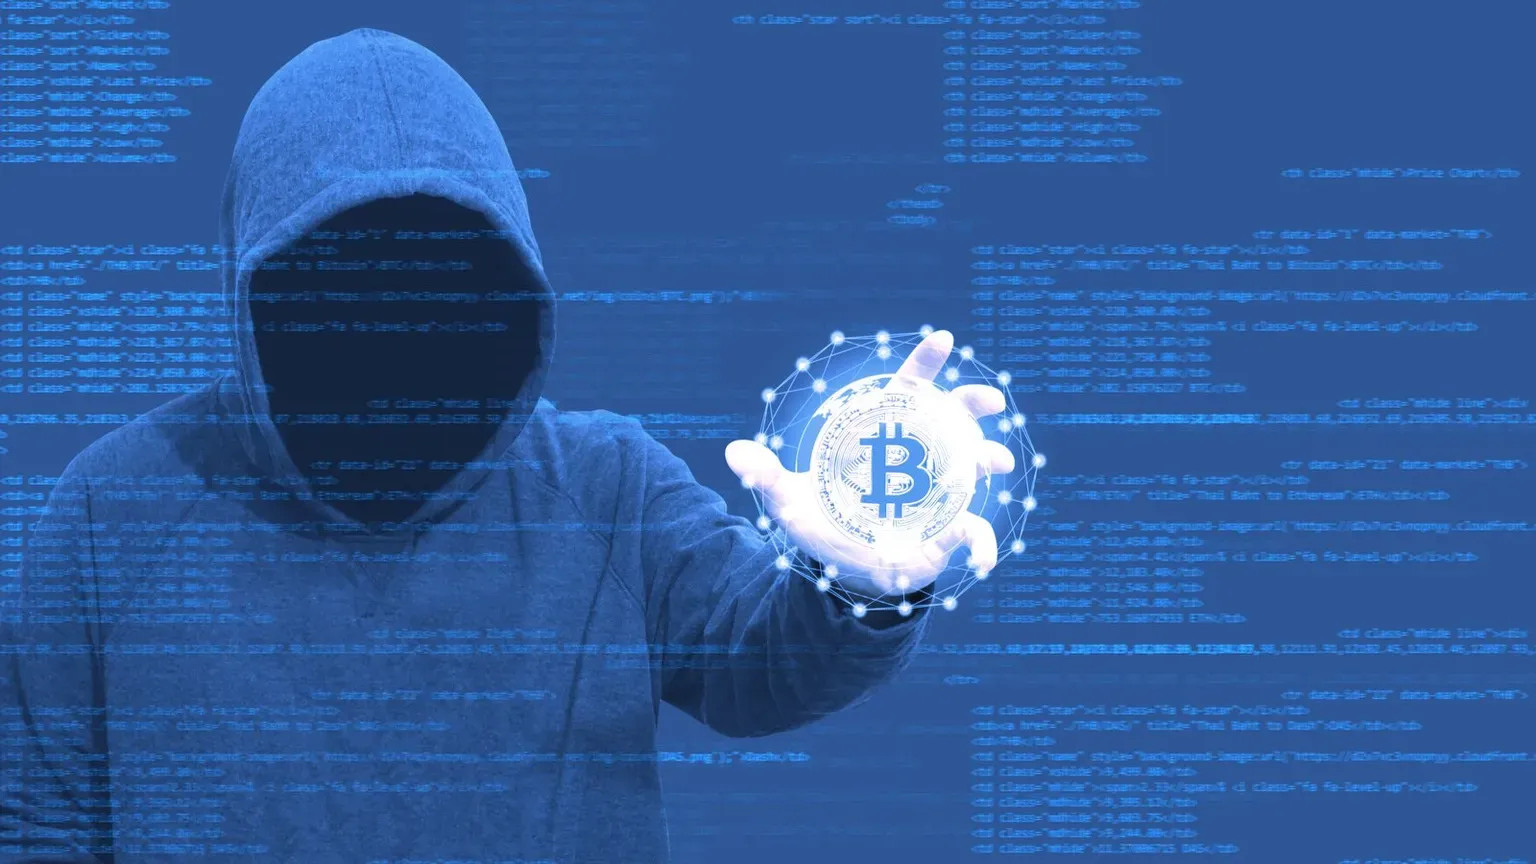 Crypto Scam Group Steals Tens Of Millions Of Dollars Across Many DeFi Platforms